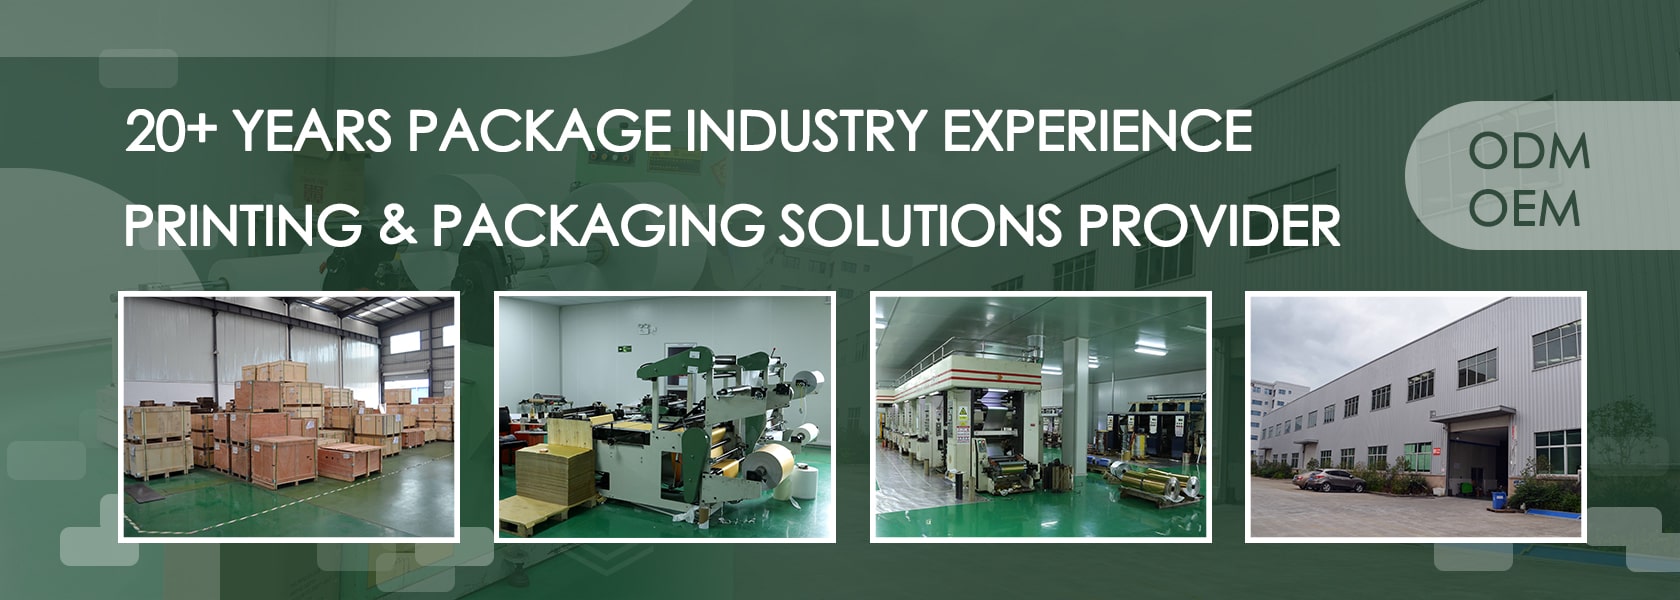 More than 20 years package industry experience printing and packaging solutions provider